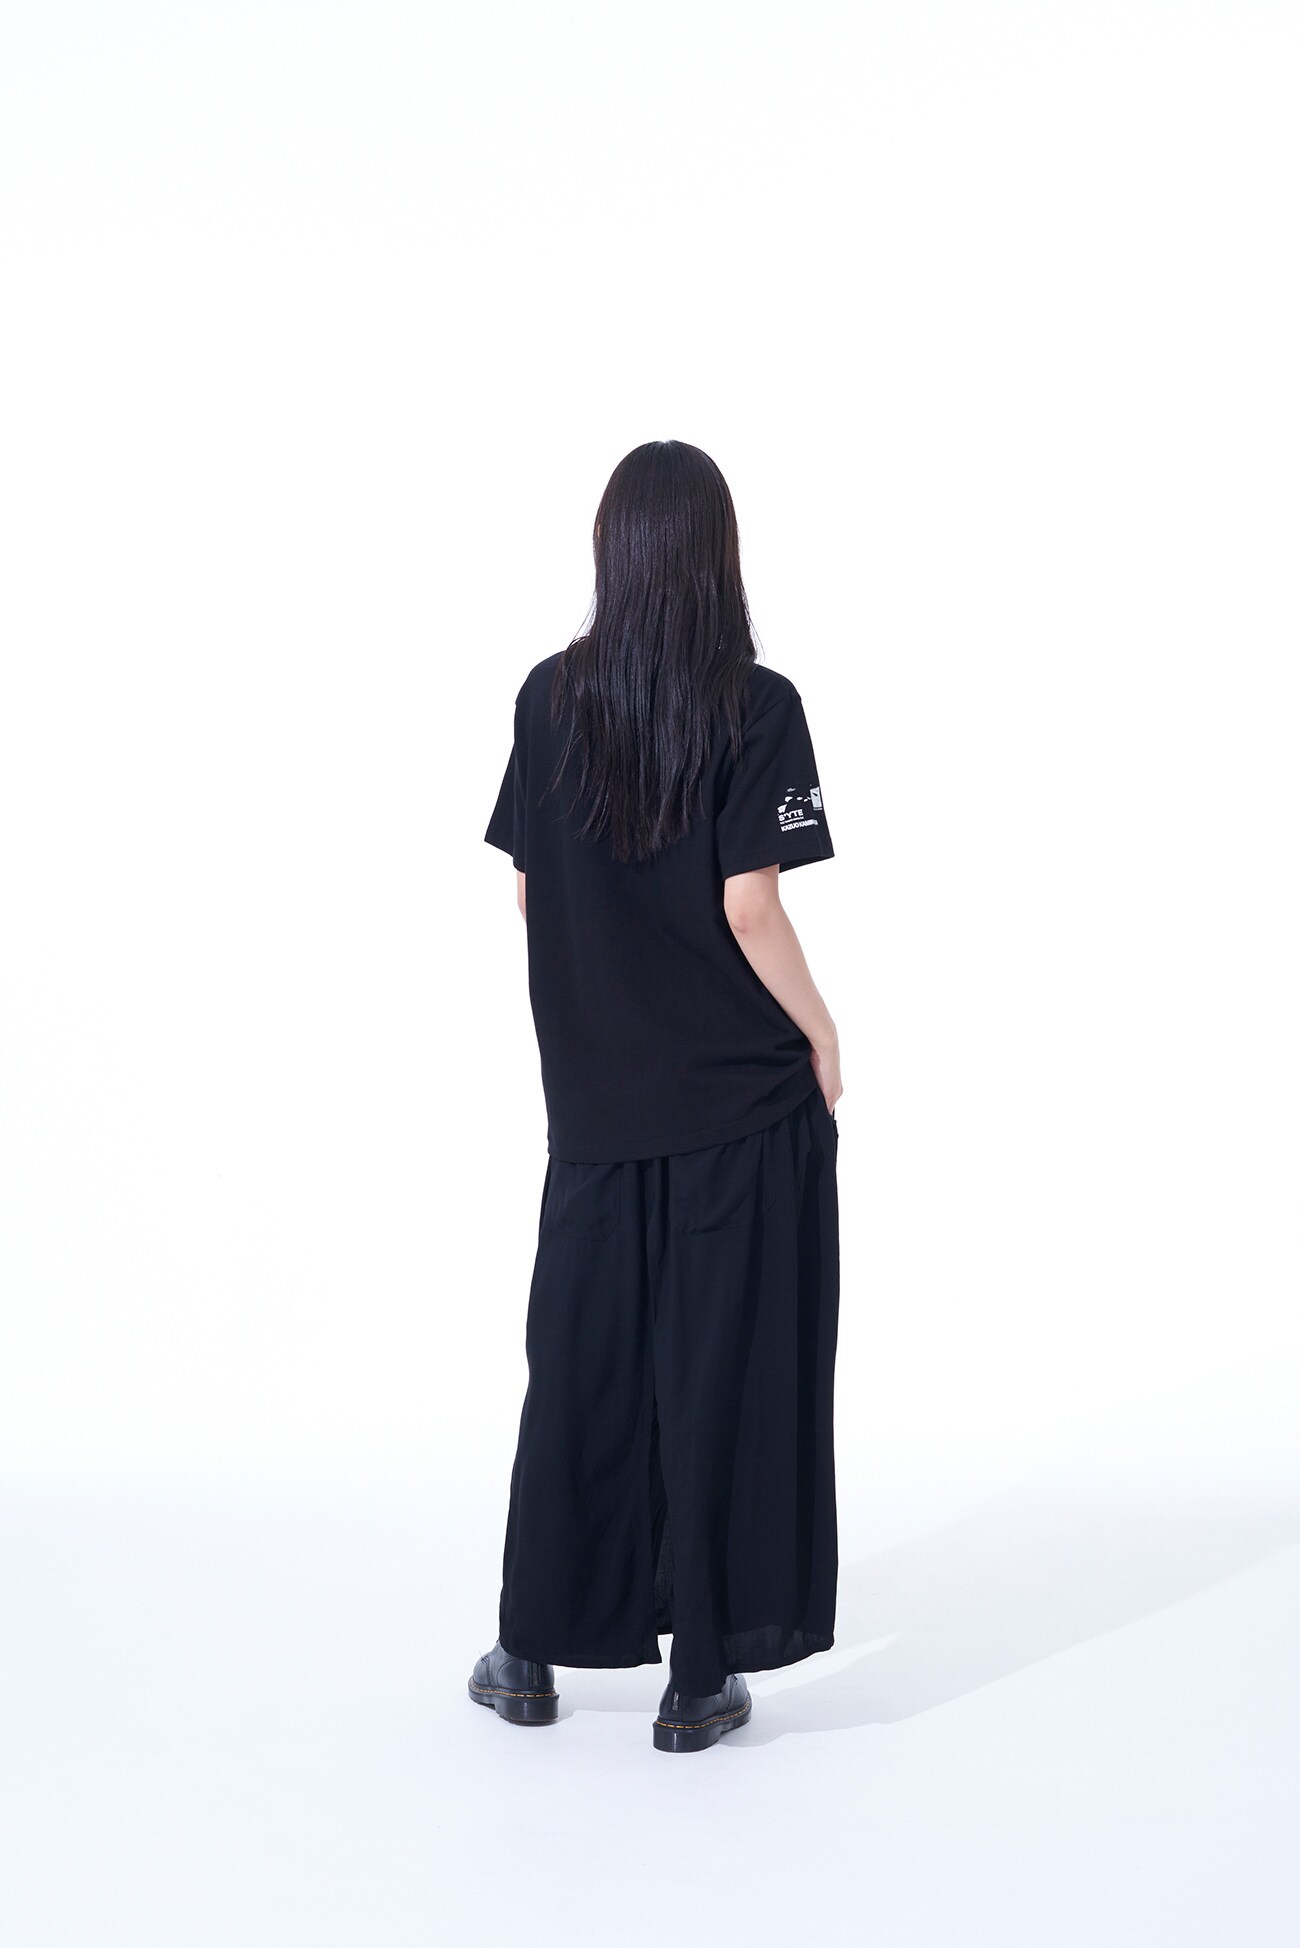 S'YTE x KAZUO KAMIMURA-幻の一枚絵-COTTON JERSEY T-SHIRT WITH PRINTED ILLUSTRATION